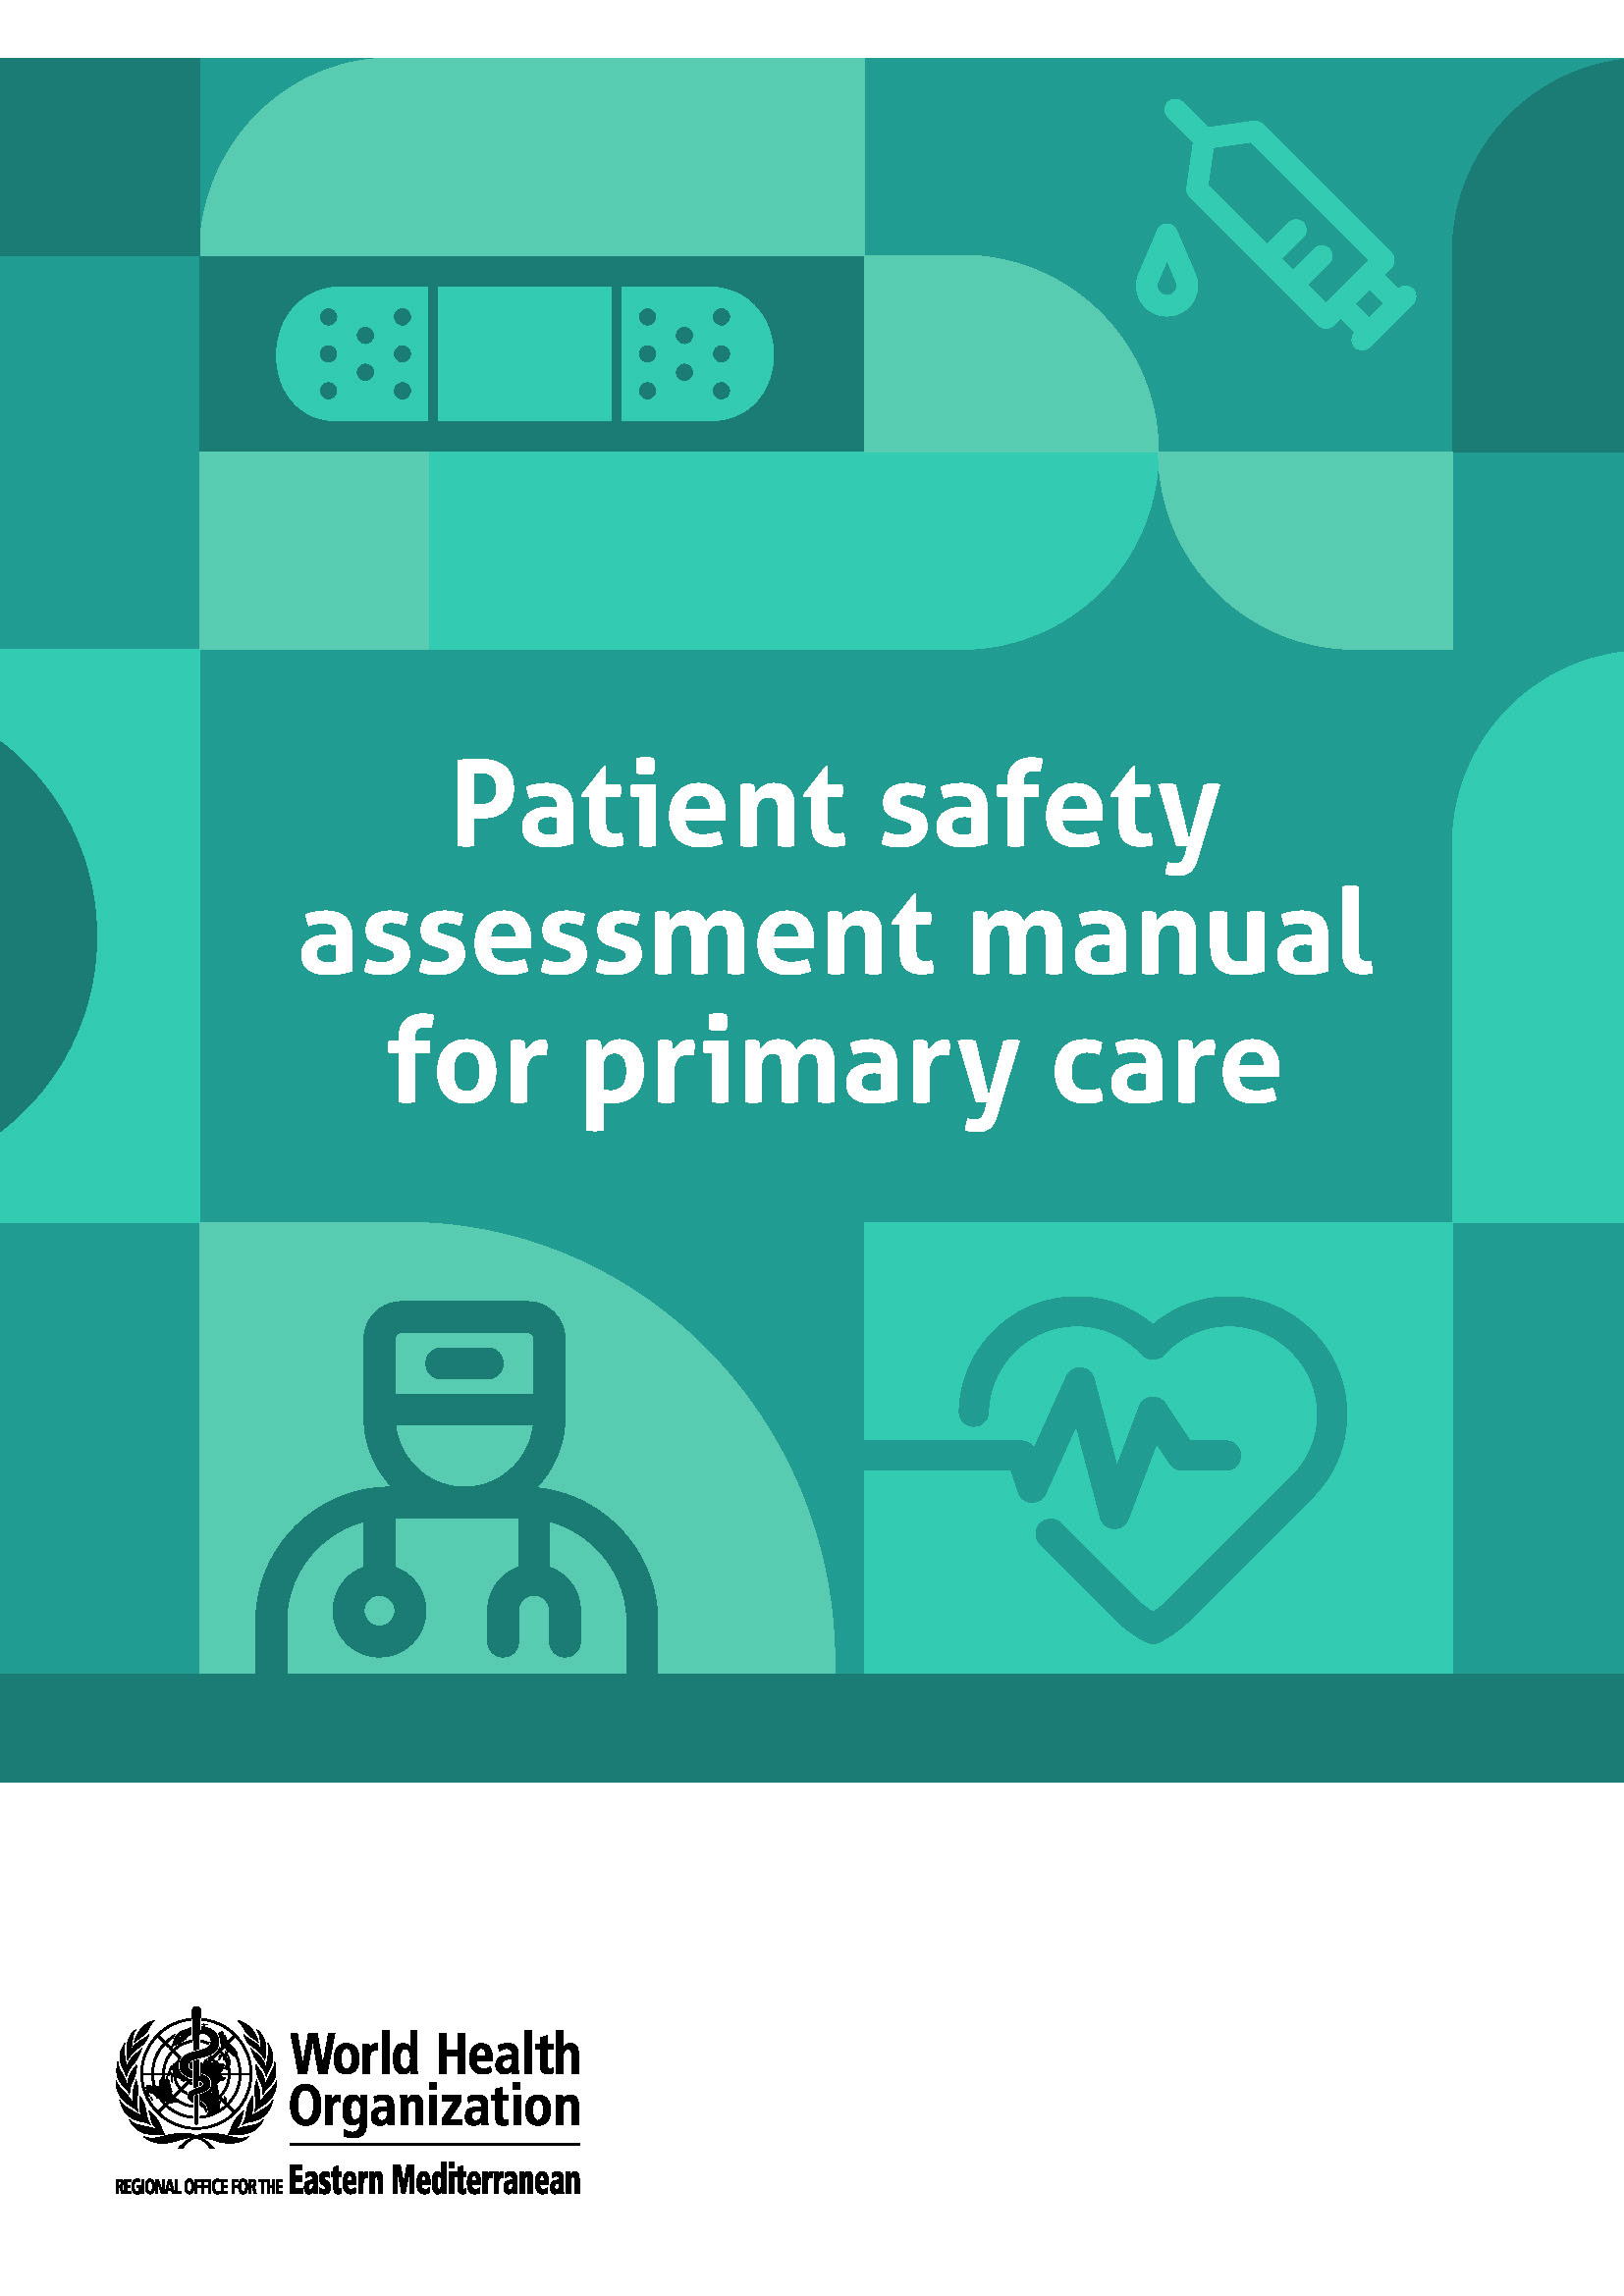 Patient safety assessment manual for primary care